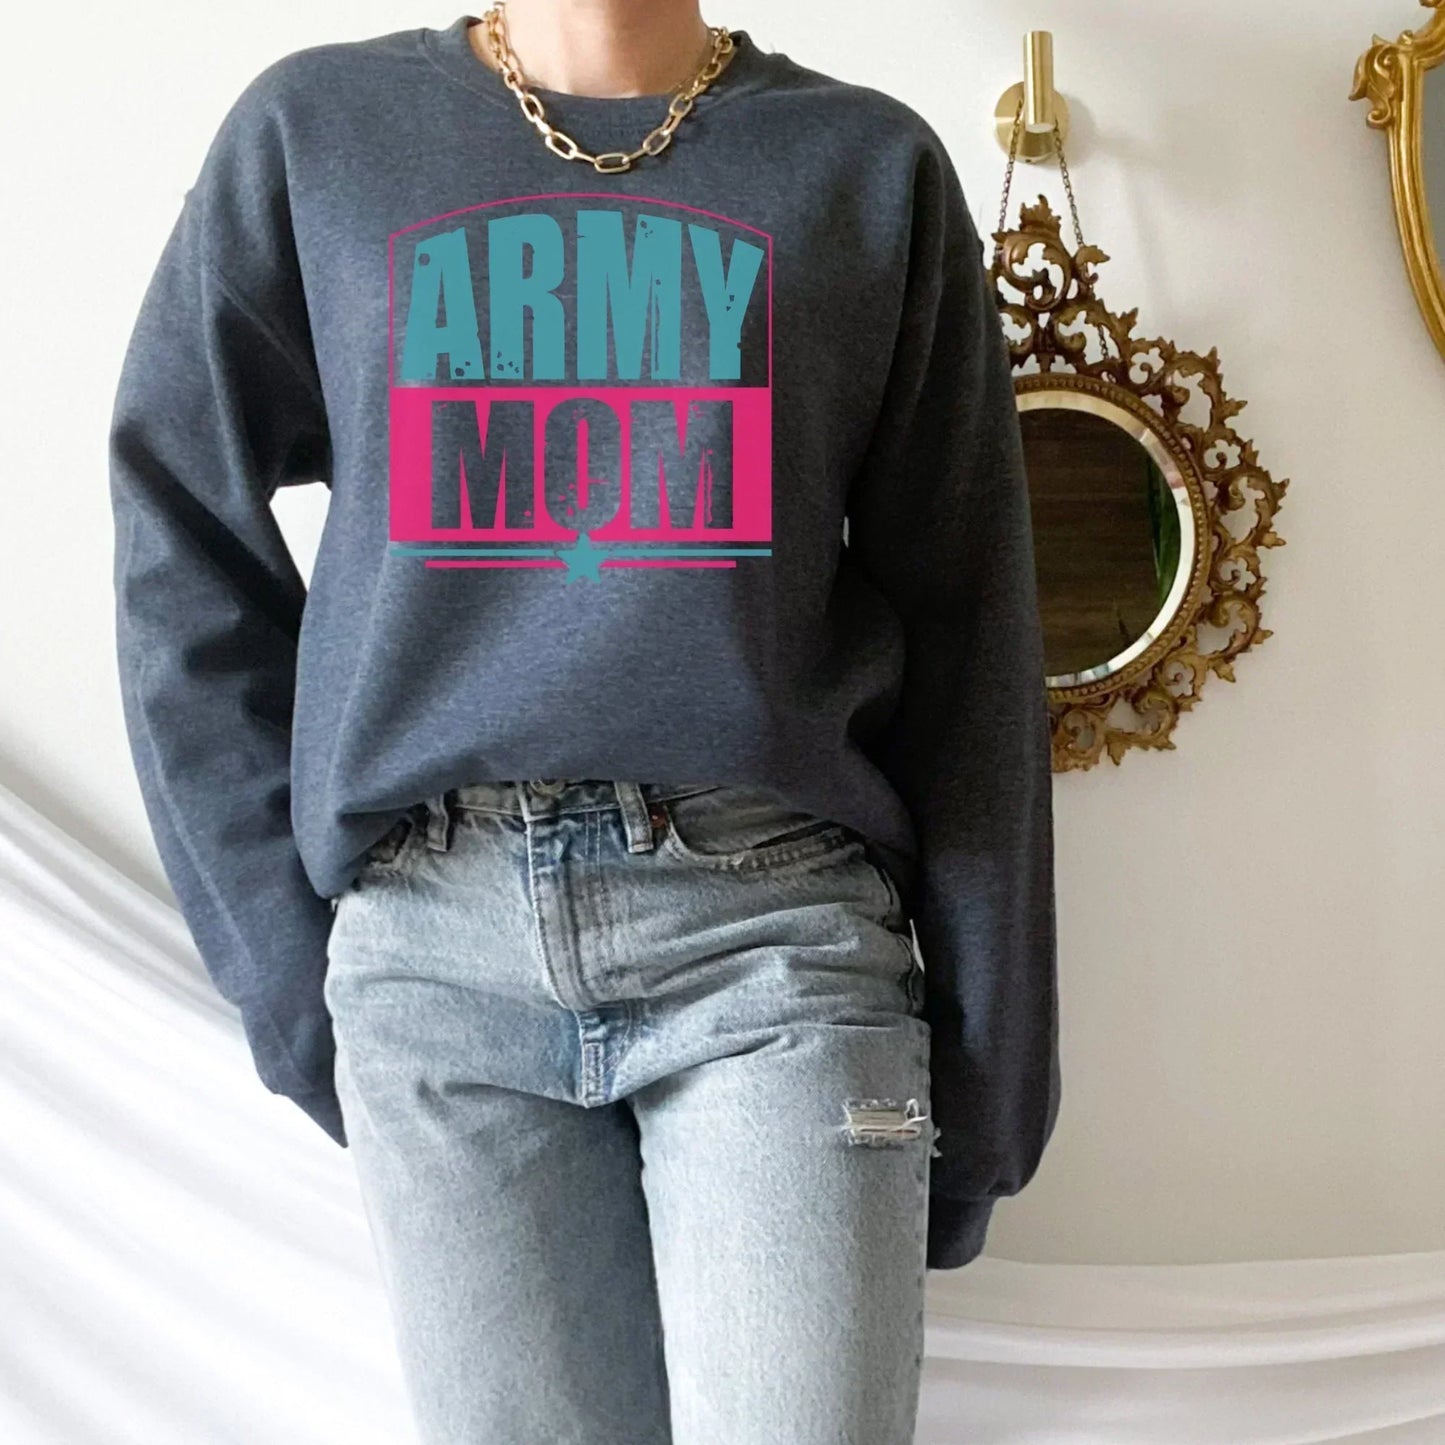 Army Mom Shirt, Army Wife, Military Mom Shirt, Military Wife Sweatshirt, Army Mom Gift, Air Force Mom, Support our troops, Navy Mom, US Army HMDesignStudioUS